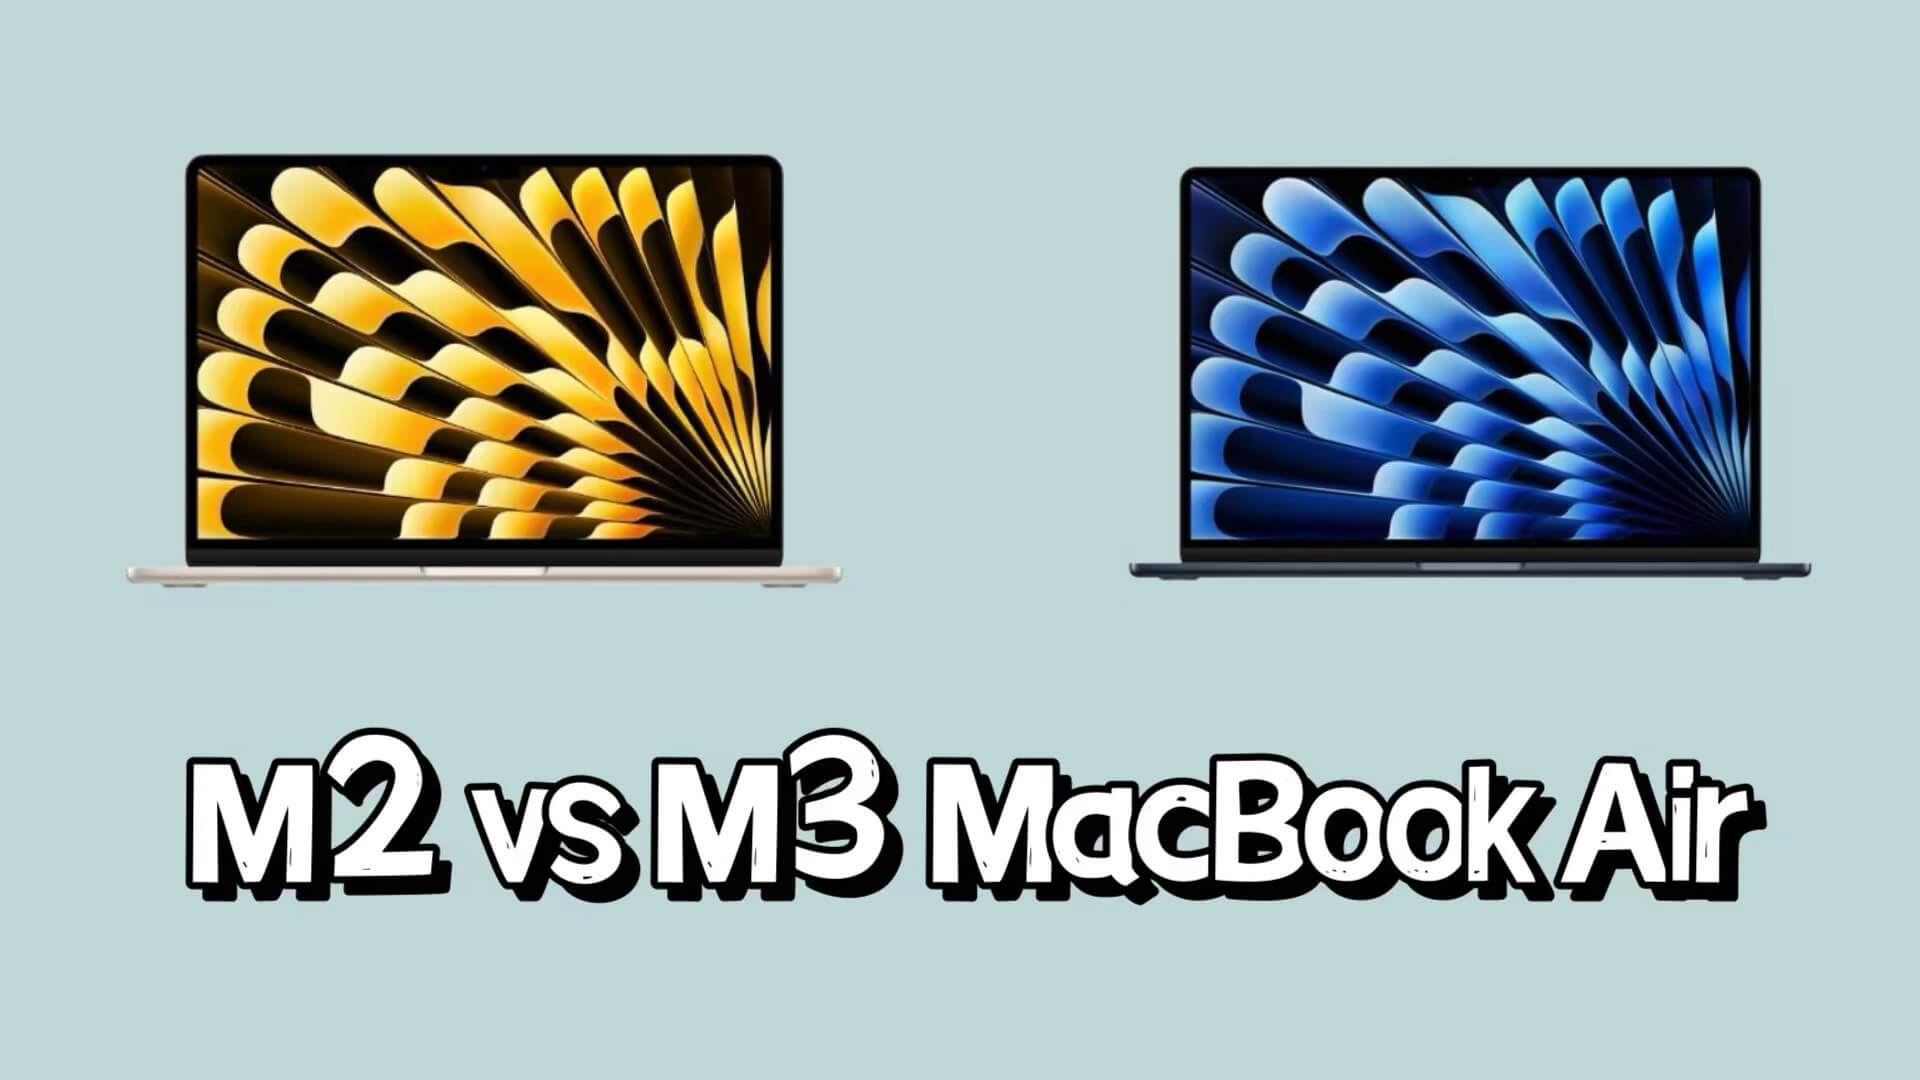 M3 MacBook Air vs M2 MacBook Air What’s the difference and improved